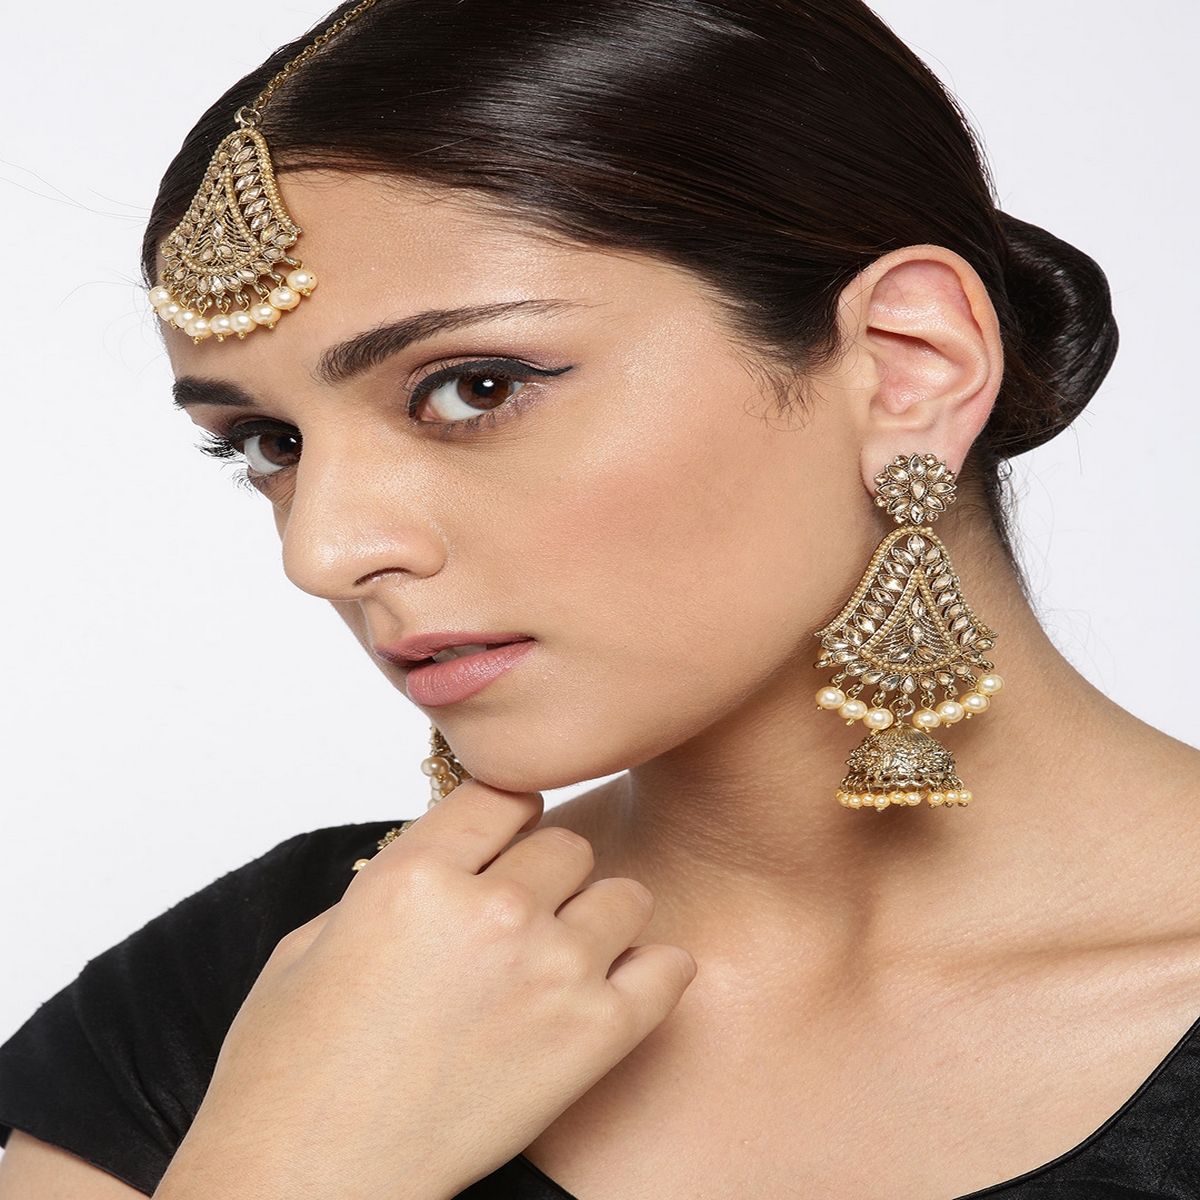 New Heavy Weight Gold Earrings Designs  Gold Antique Kanbala Earrings  Designs  Gold earrings designs Designer earrings Jewelry collection